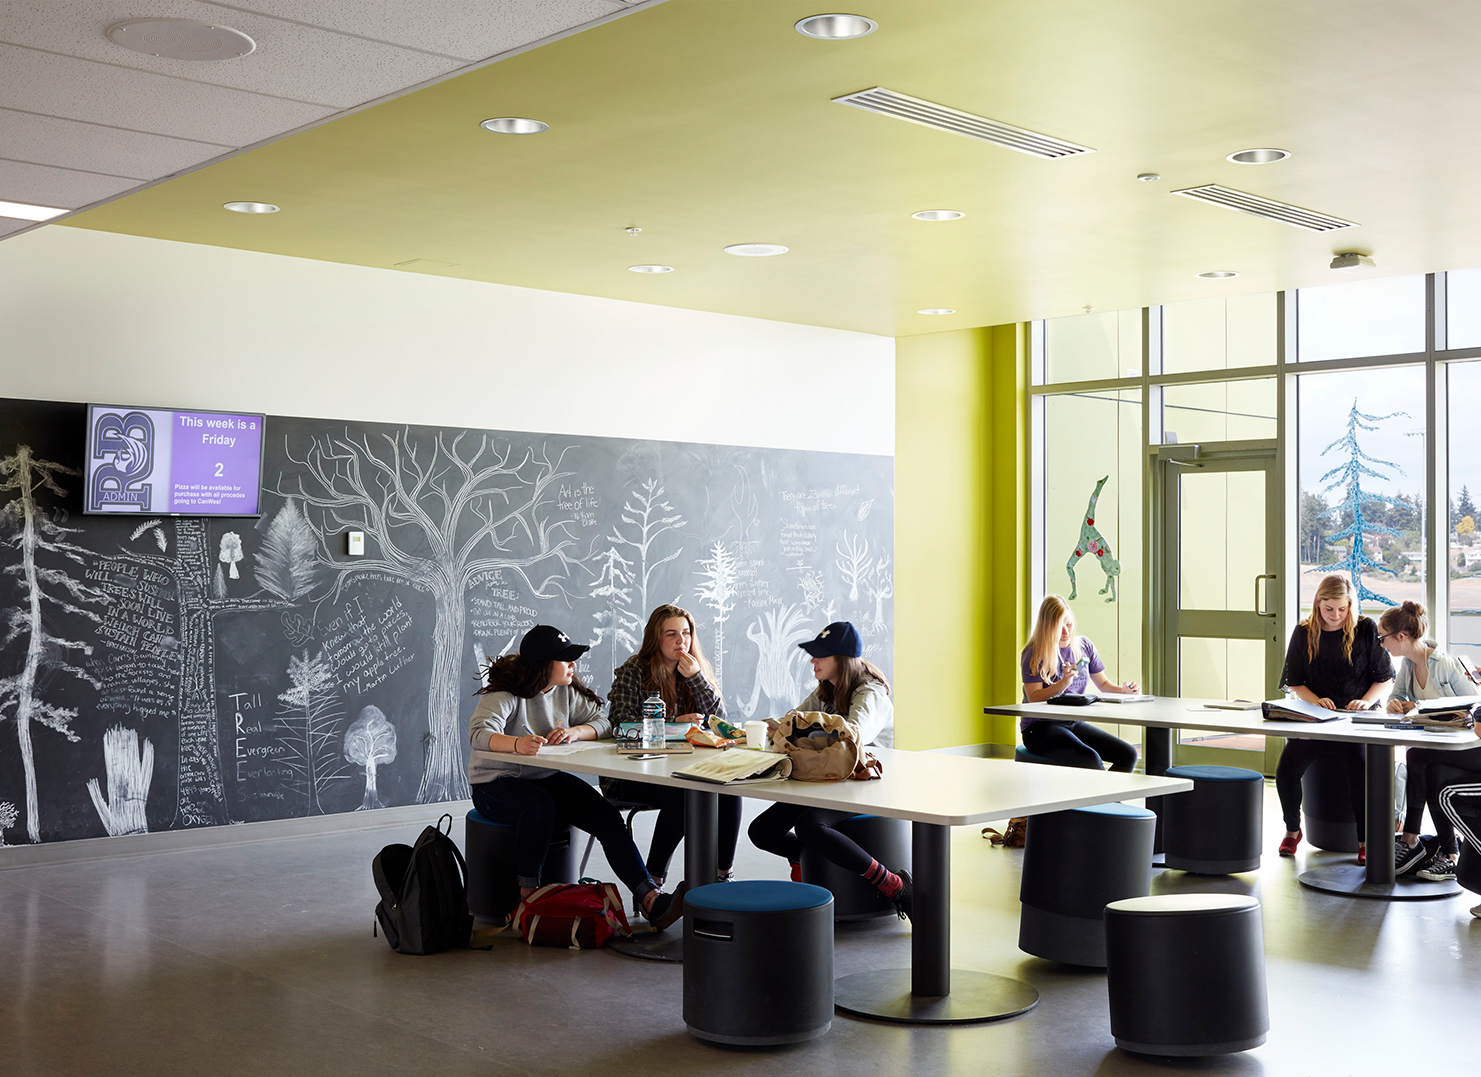 Students sitting at a table in a room with neon green ceiling.